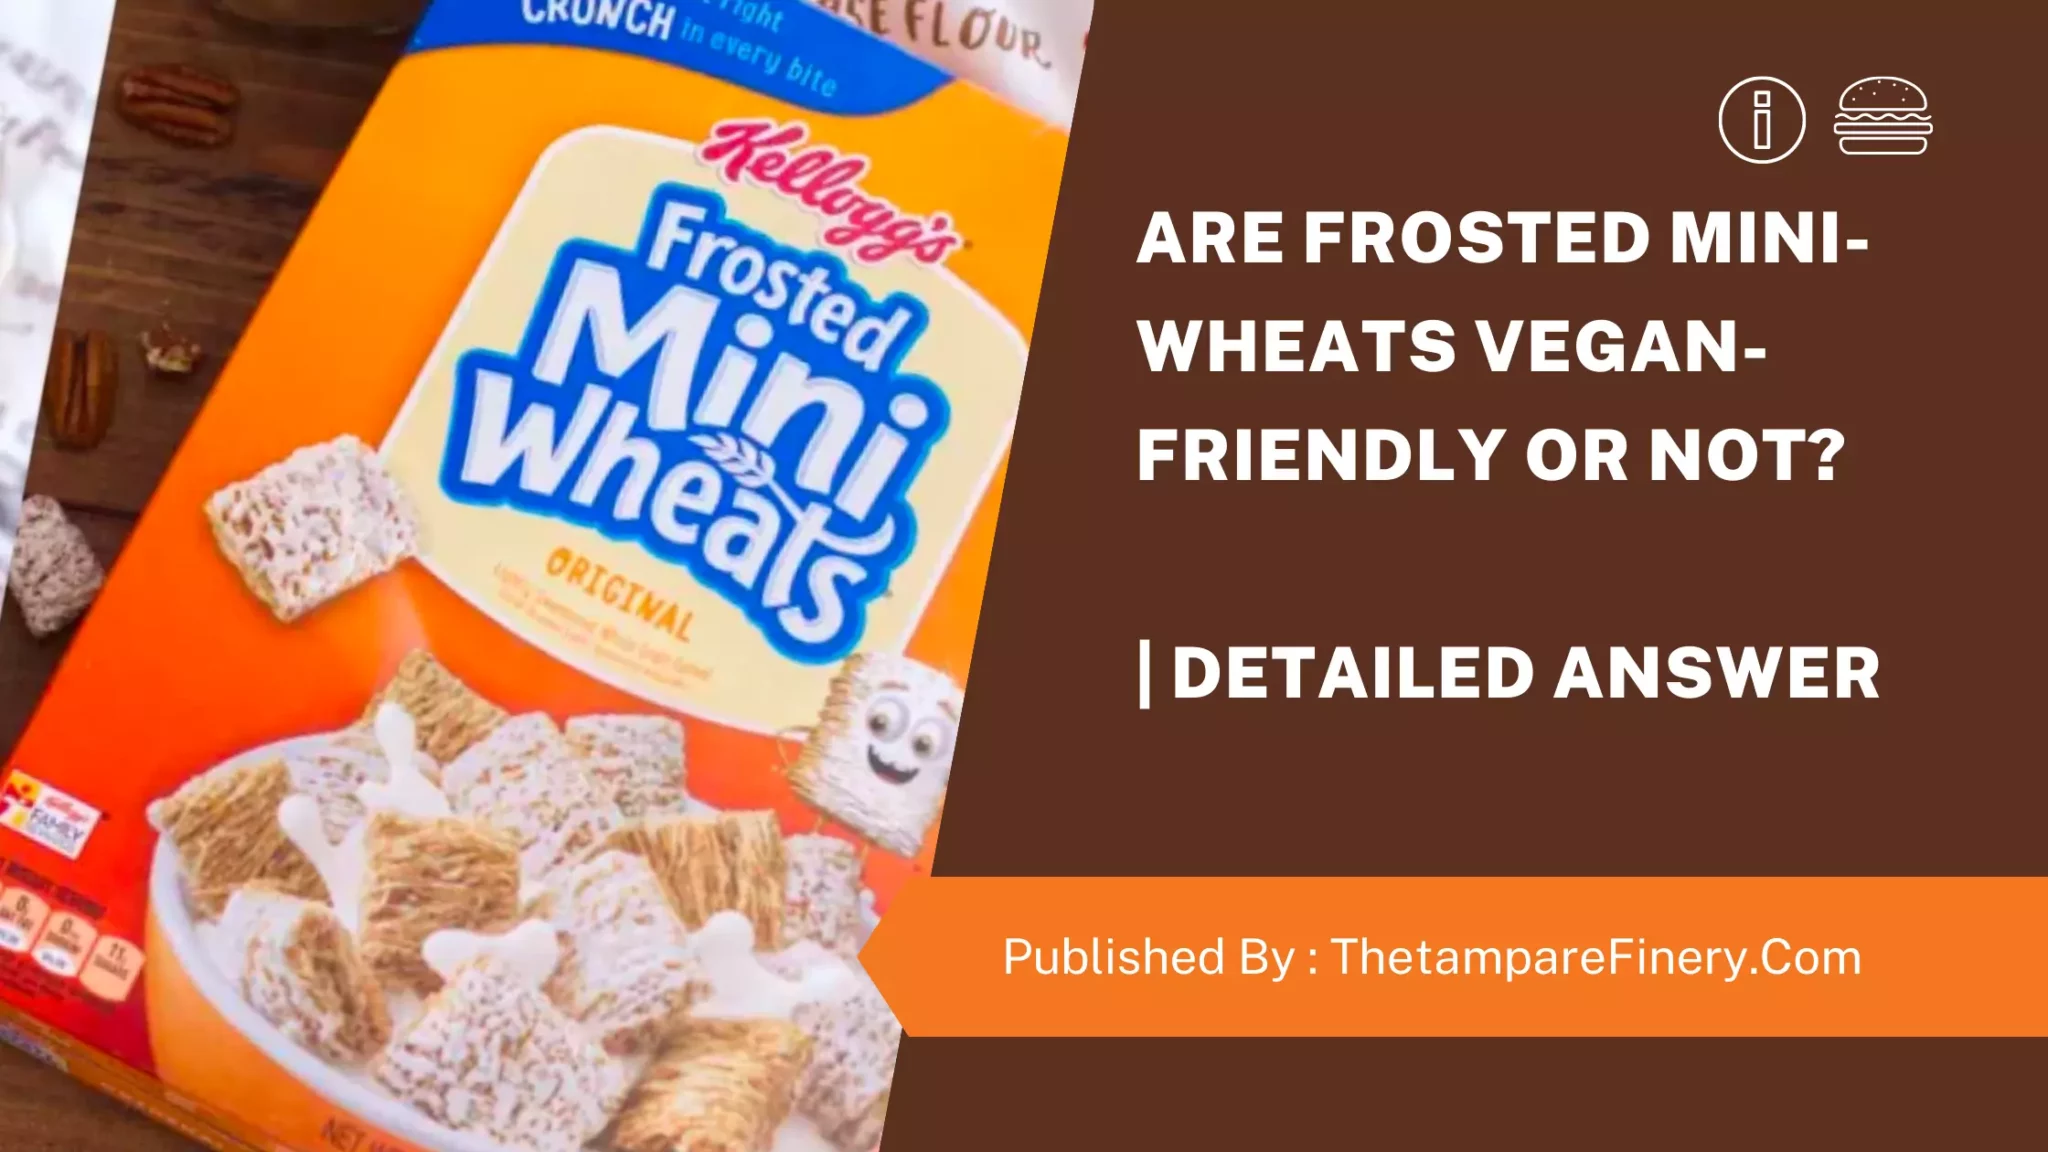 Are Frosted Mini-Wheats Vegan-Friendly Or Not